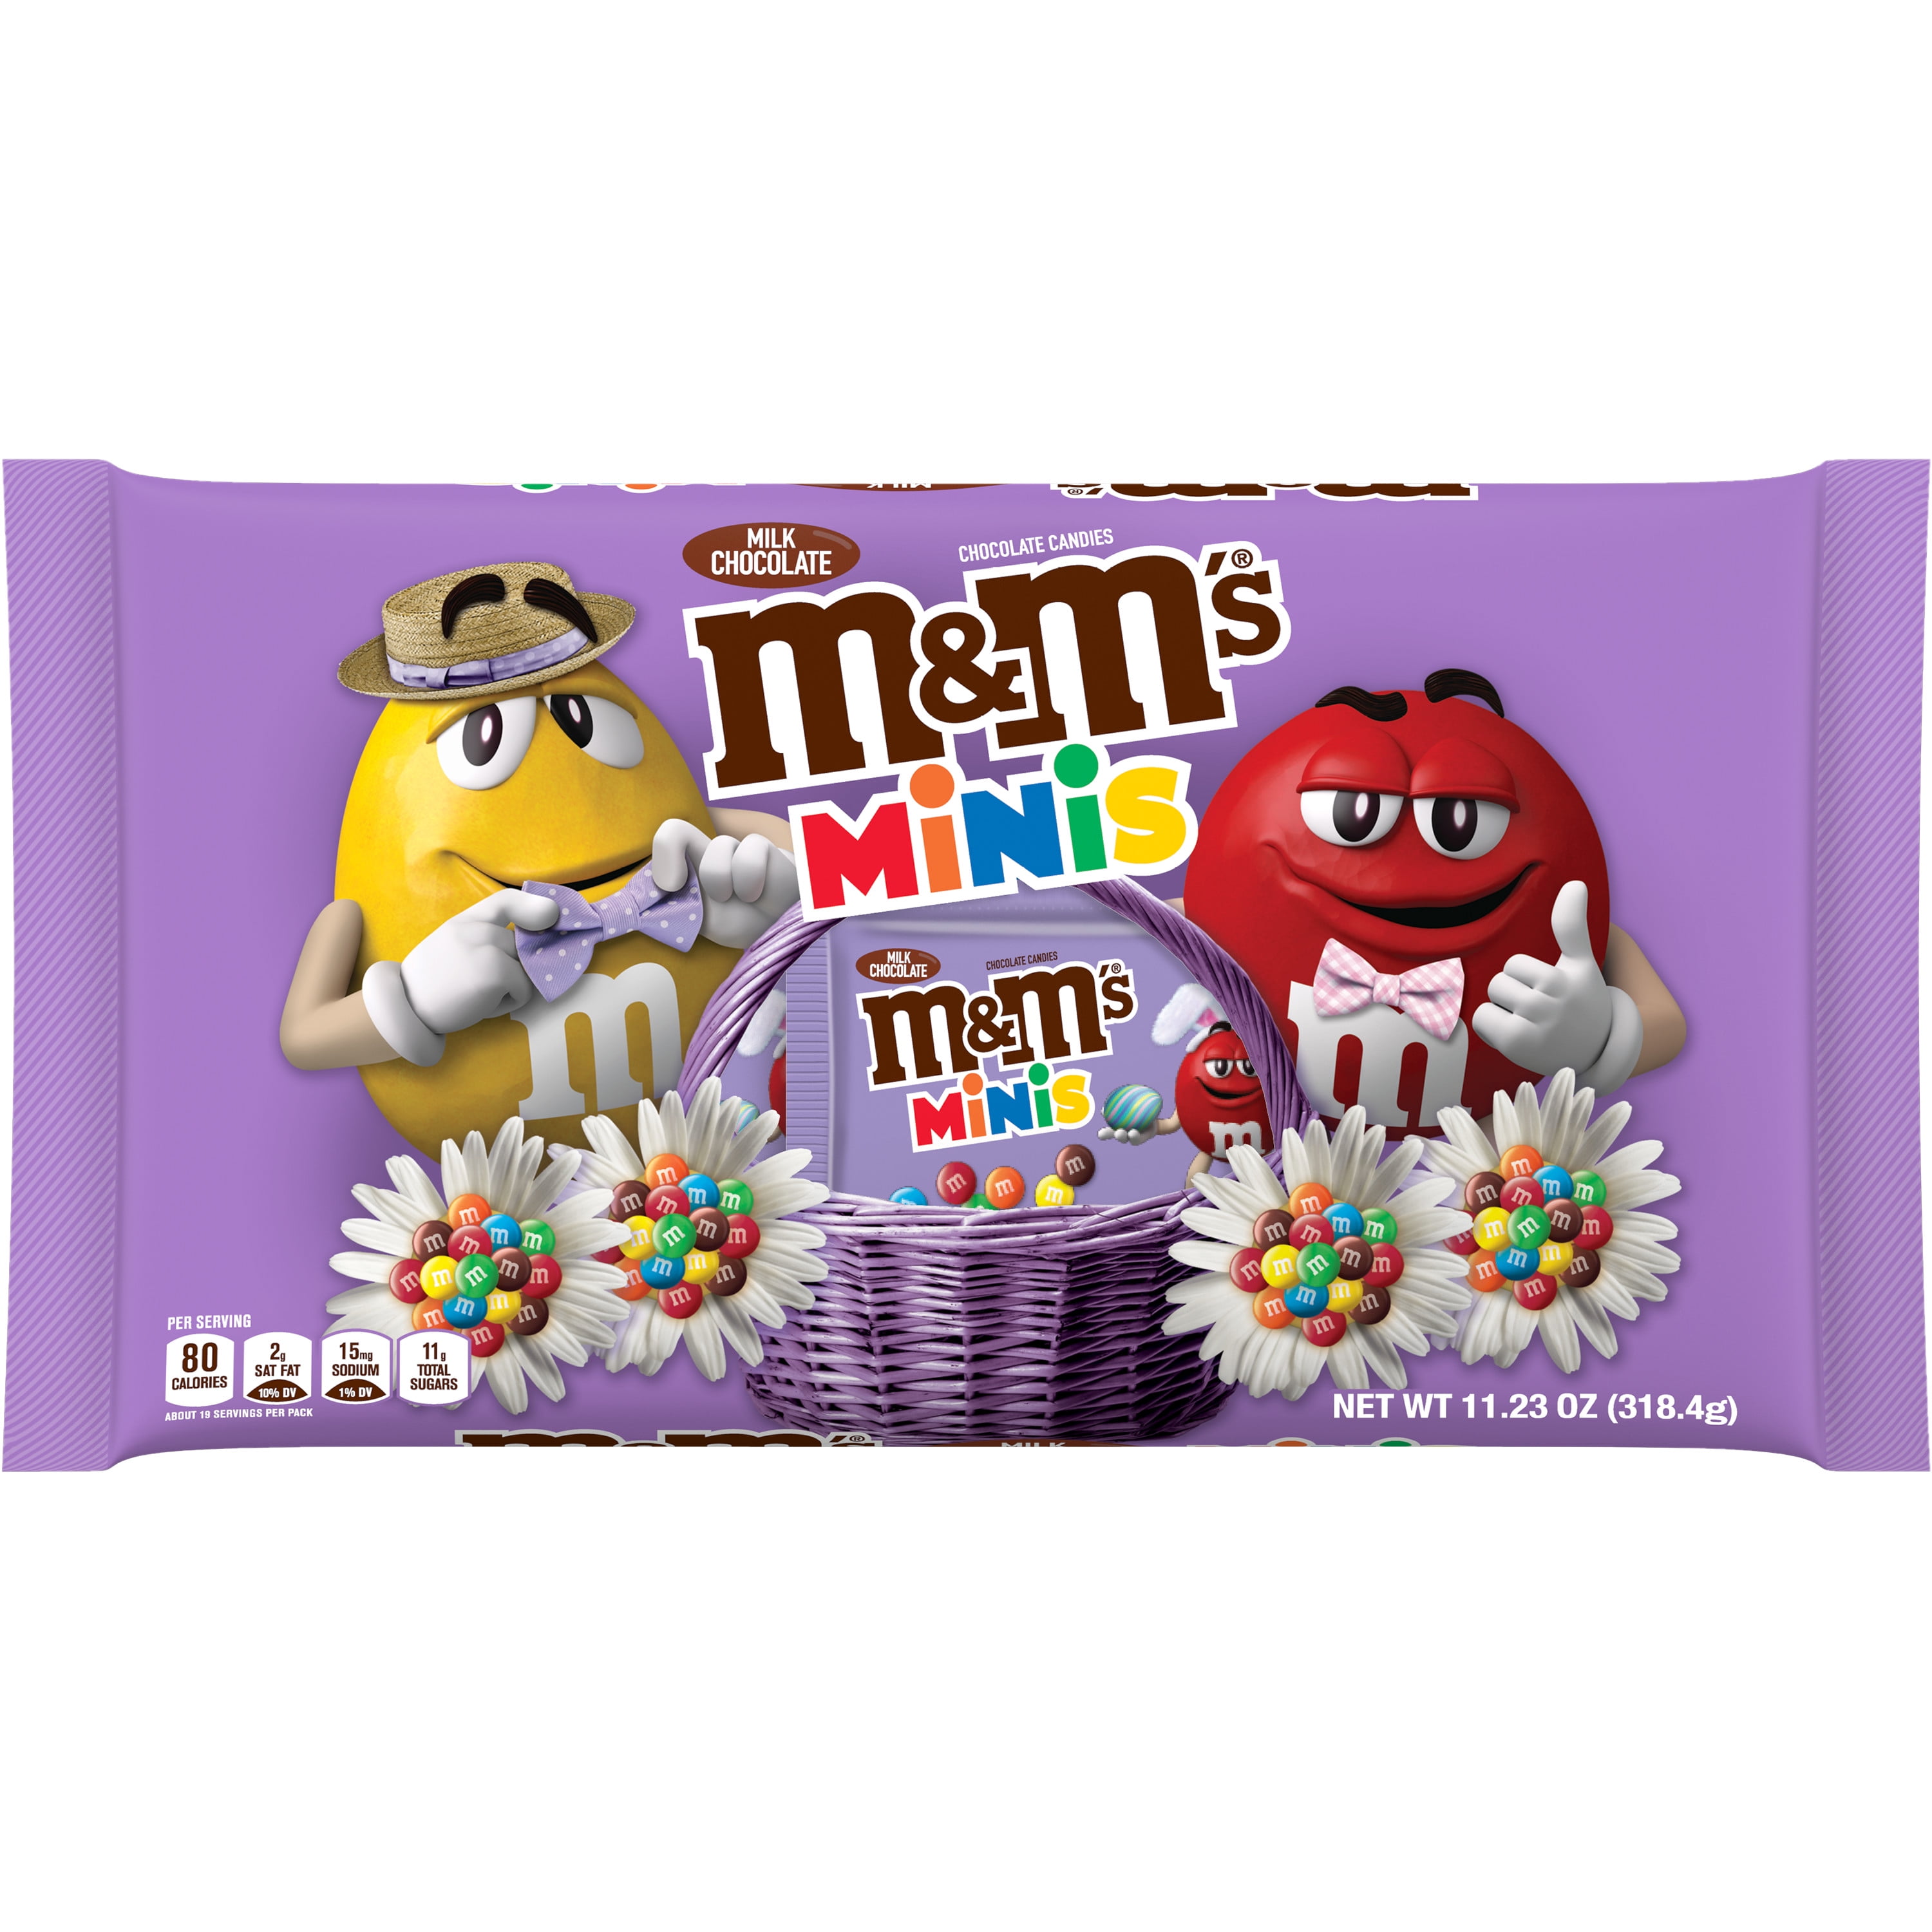 M&M's Minis Easter Milk Chocolate Candy Easter Basket Candy - 11.23 oz